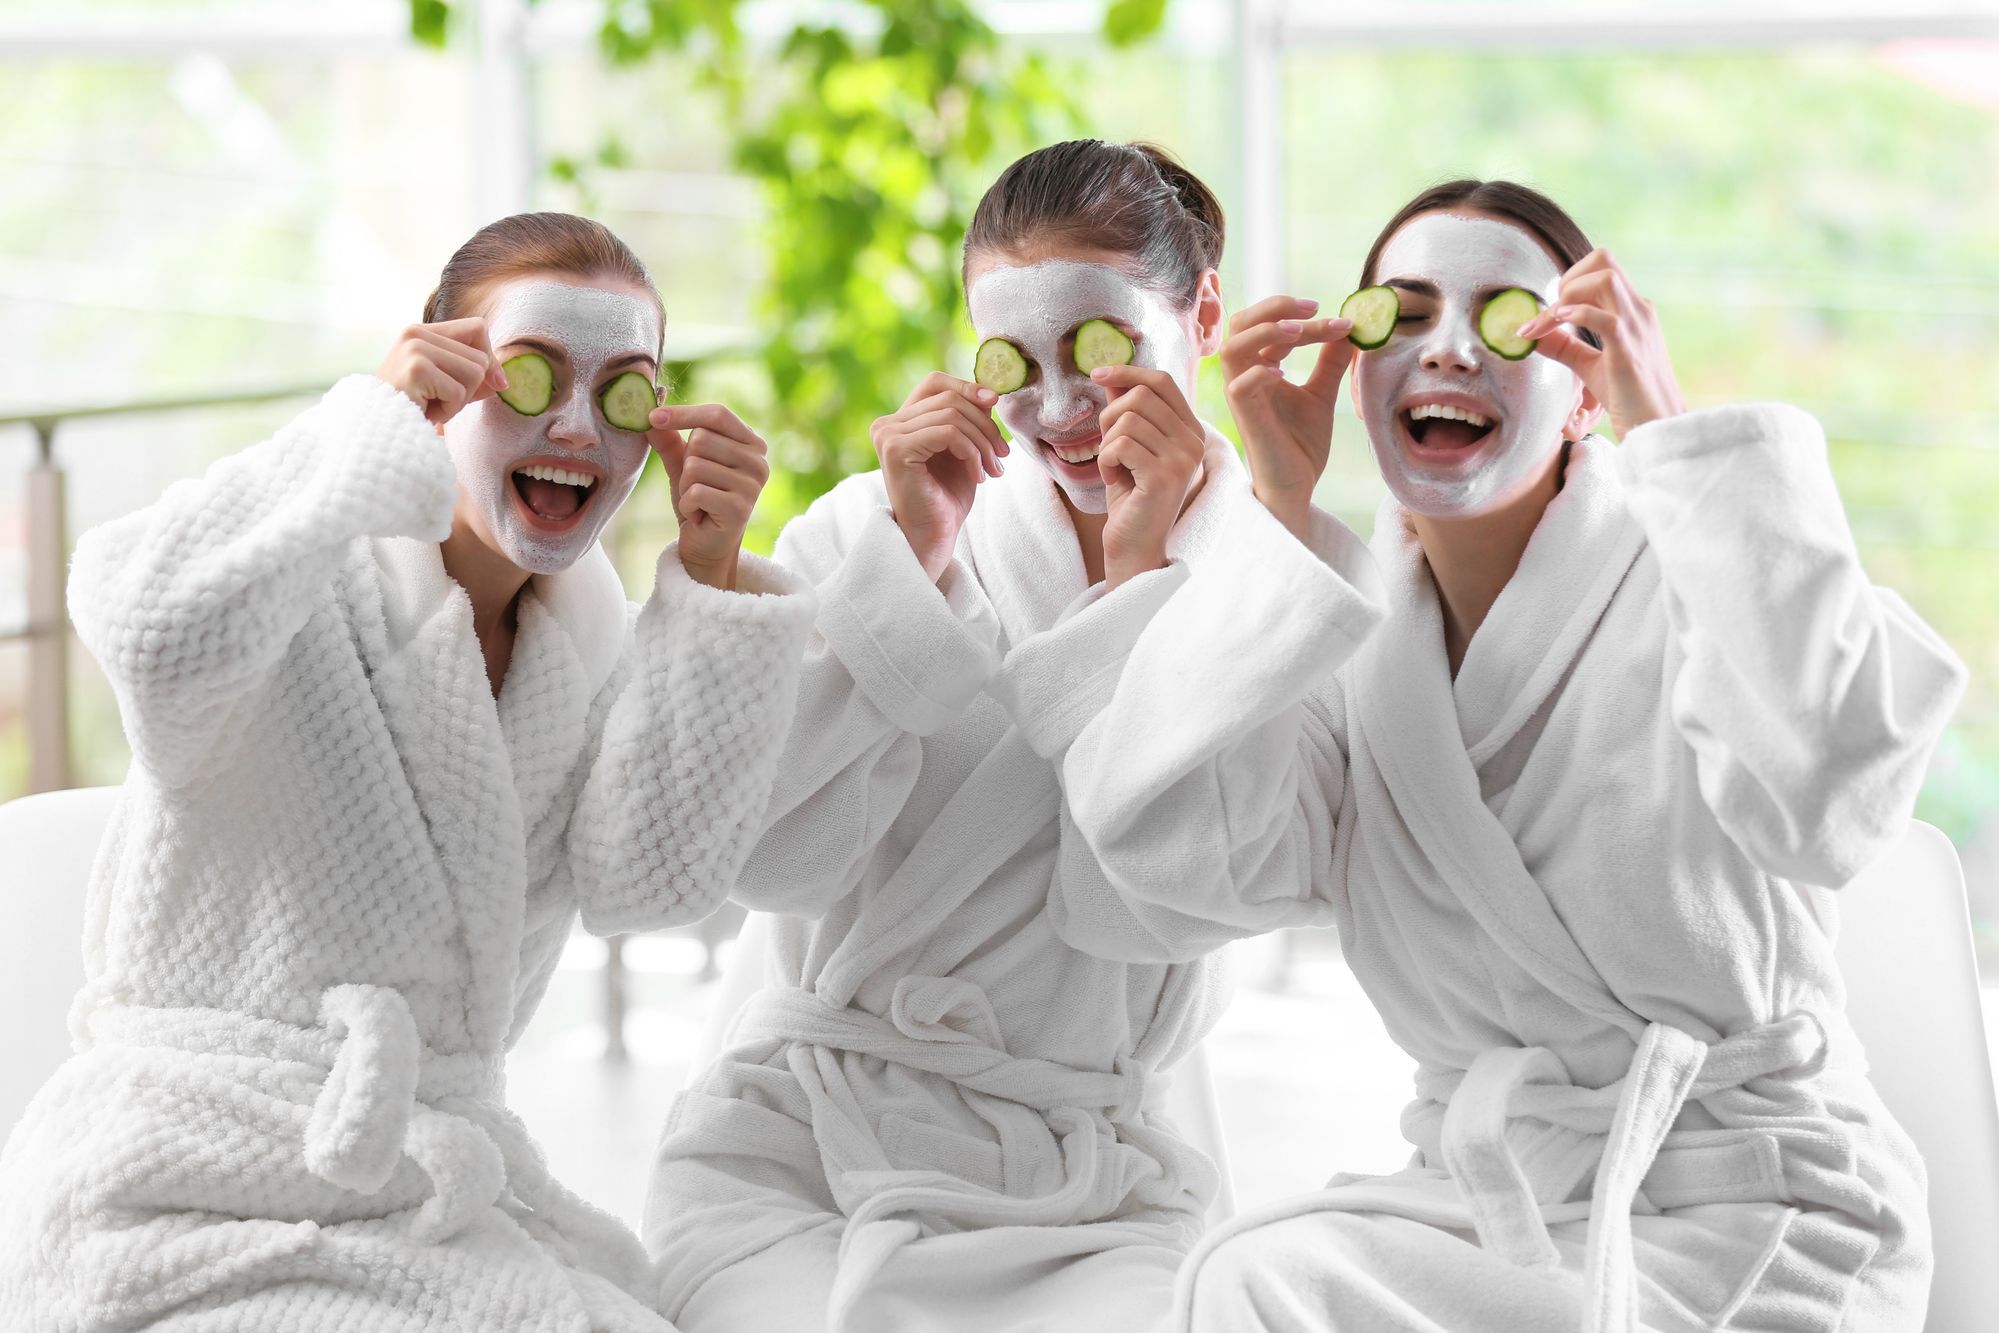 Girls Pampering Themselves Before The Big Night Out In Minneapolis